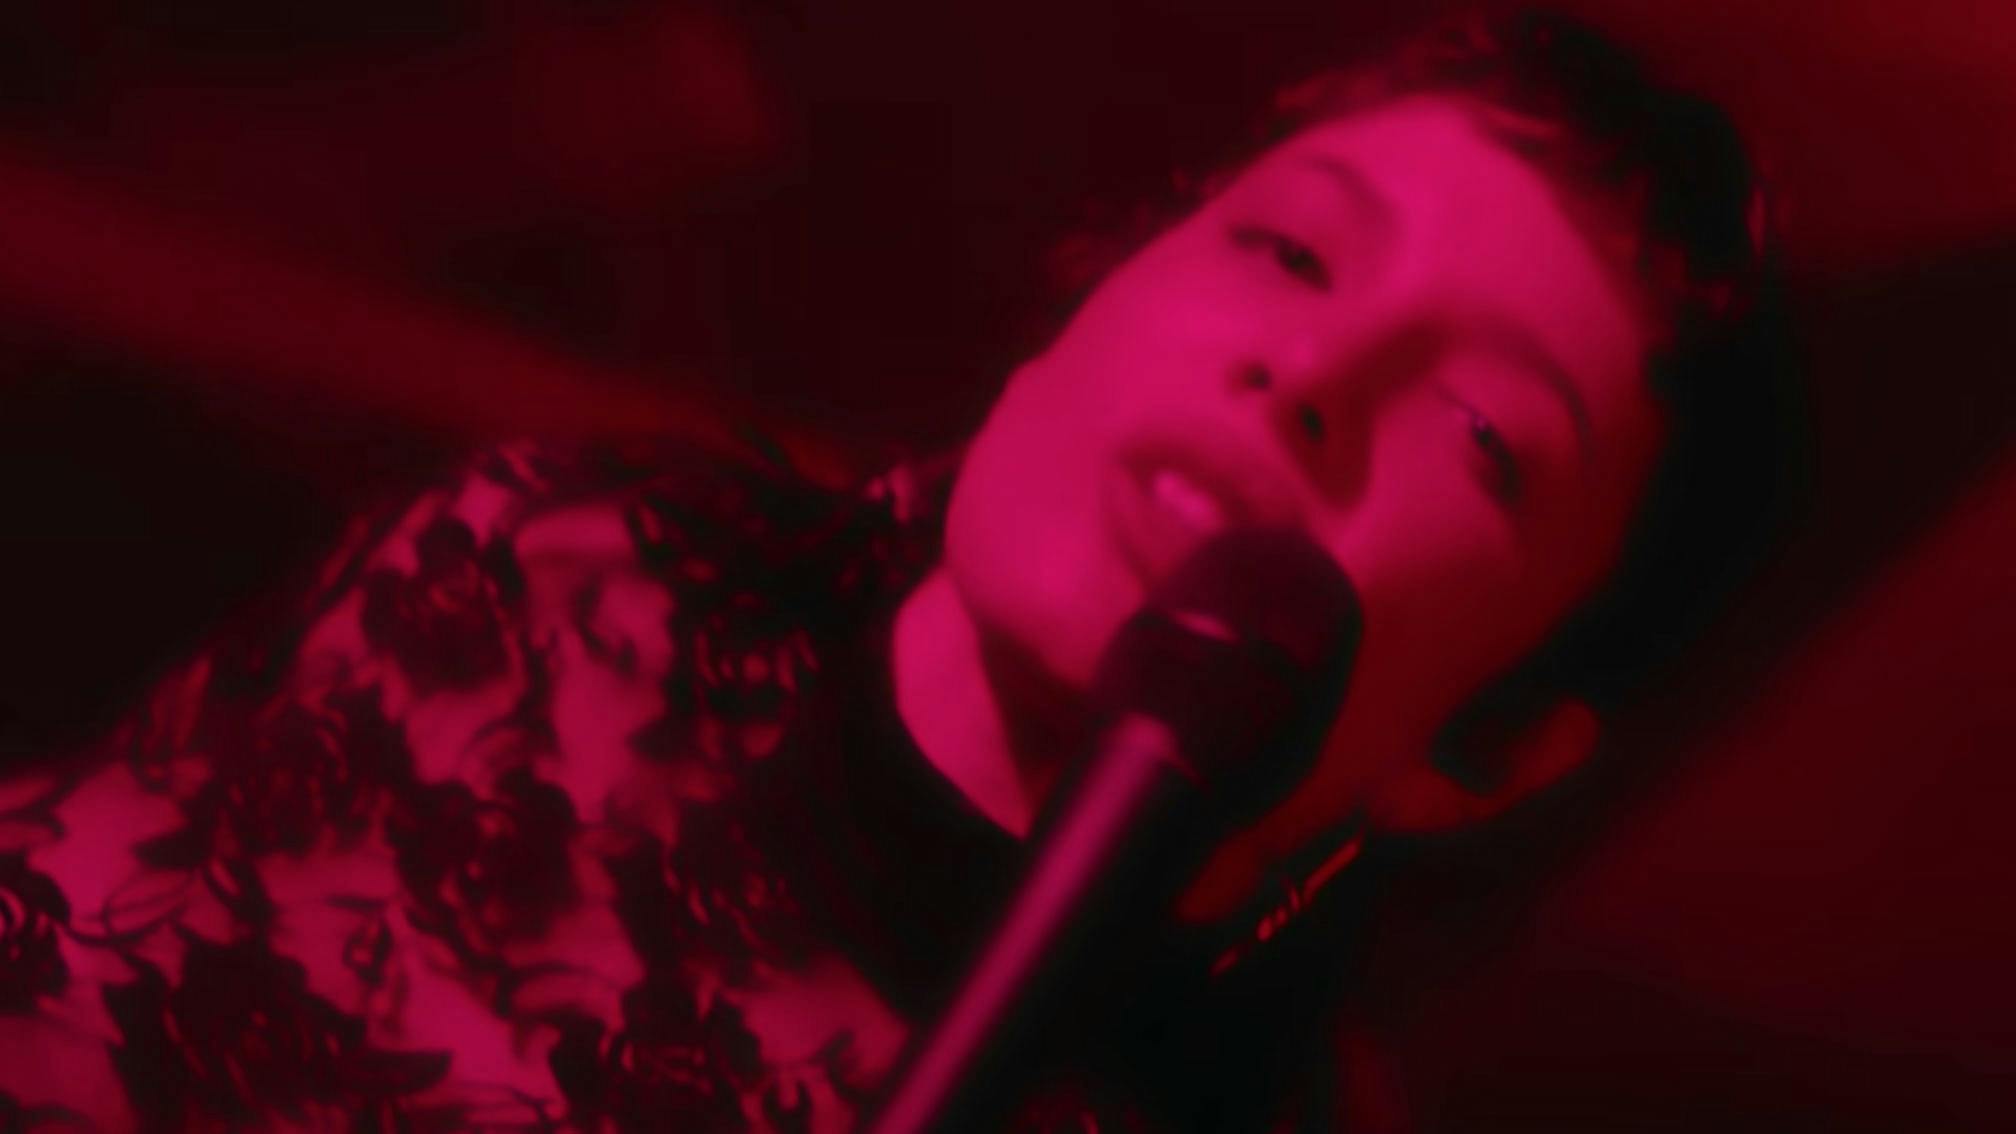 Halsey unveils dazzling new live video of You asked for this